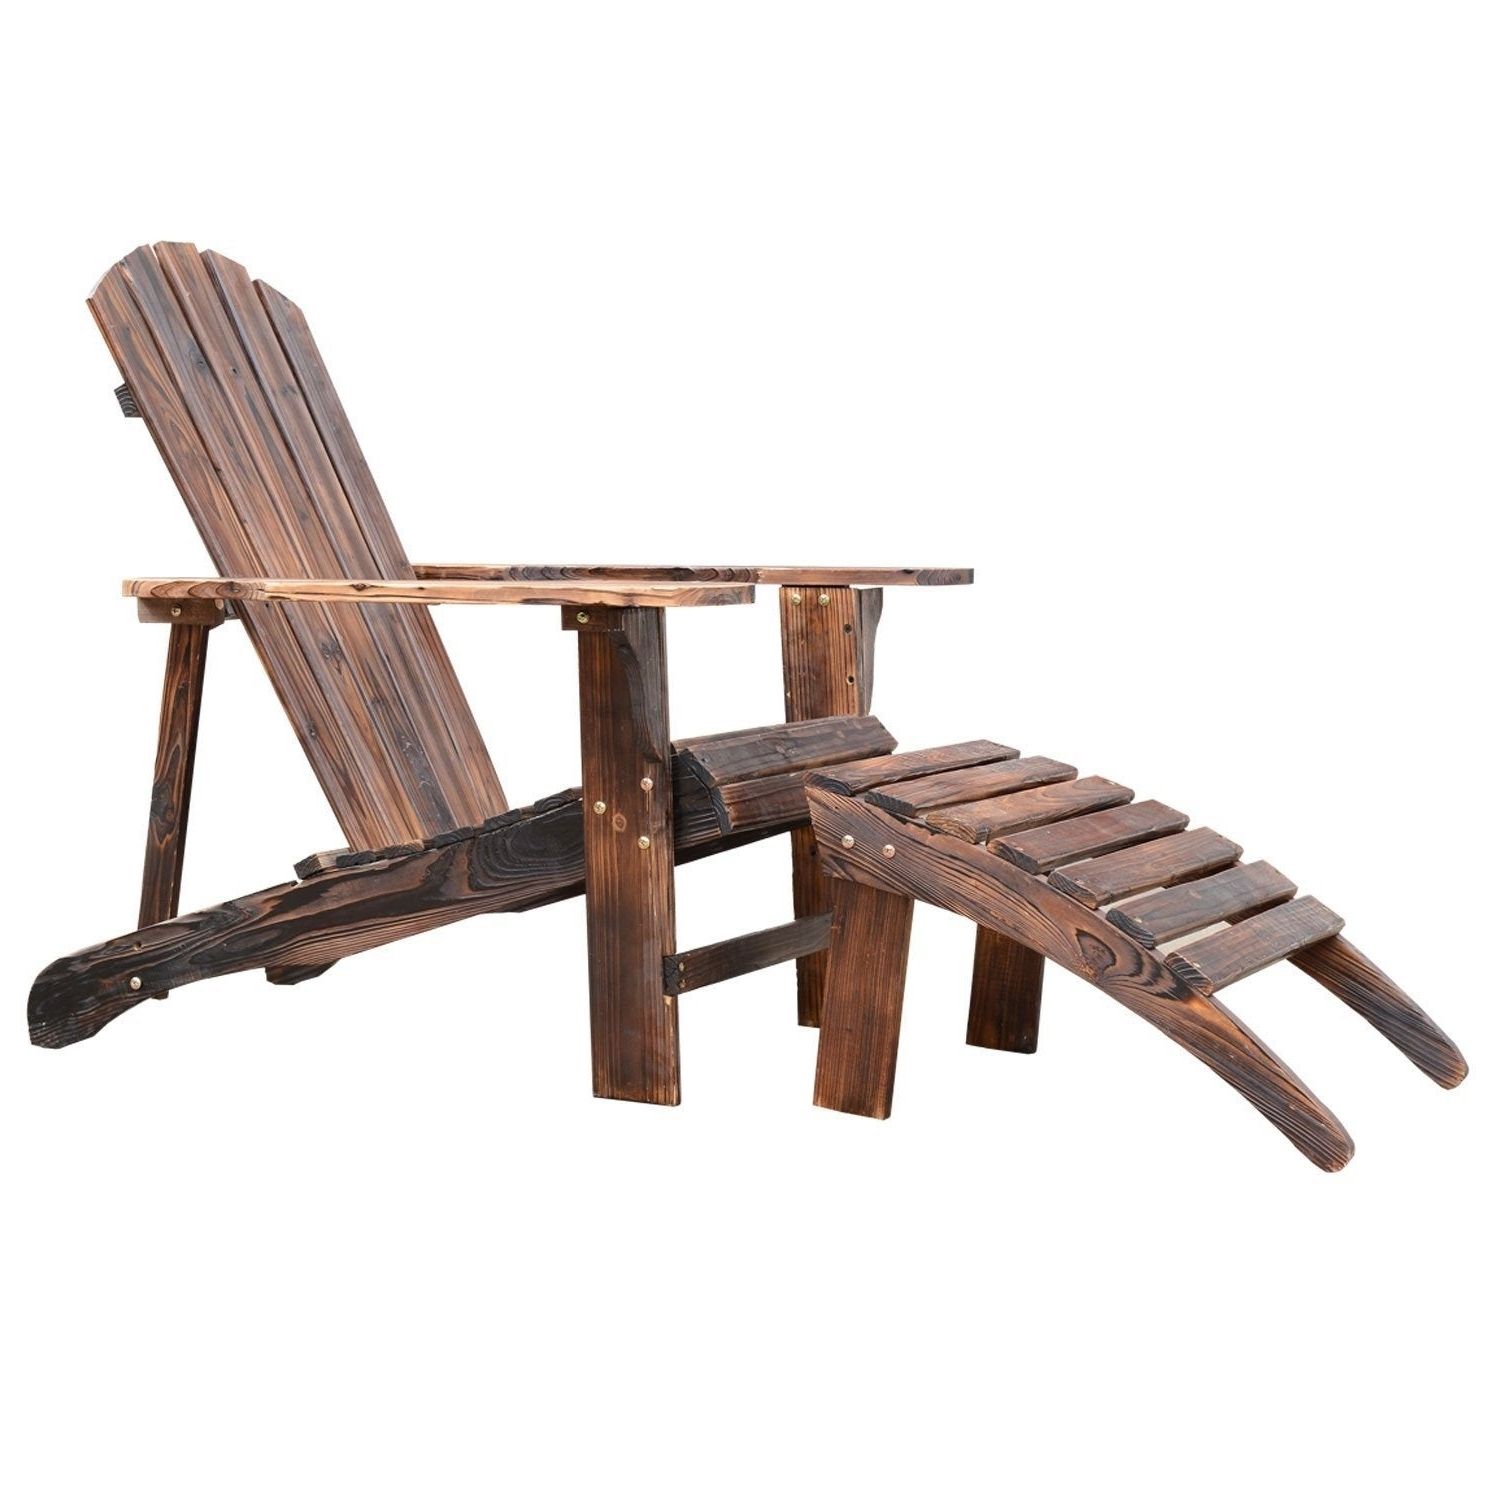 Outdoor Patio Lounge Chairs With Ottoman Intended For Favorite Outsunny Wooden Adirondack Outdoor Patio Lounge Chair With Ottoman – Rustic  Brown (View 16 of 25)